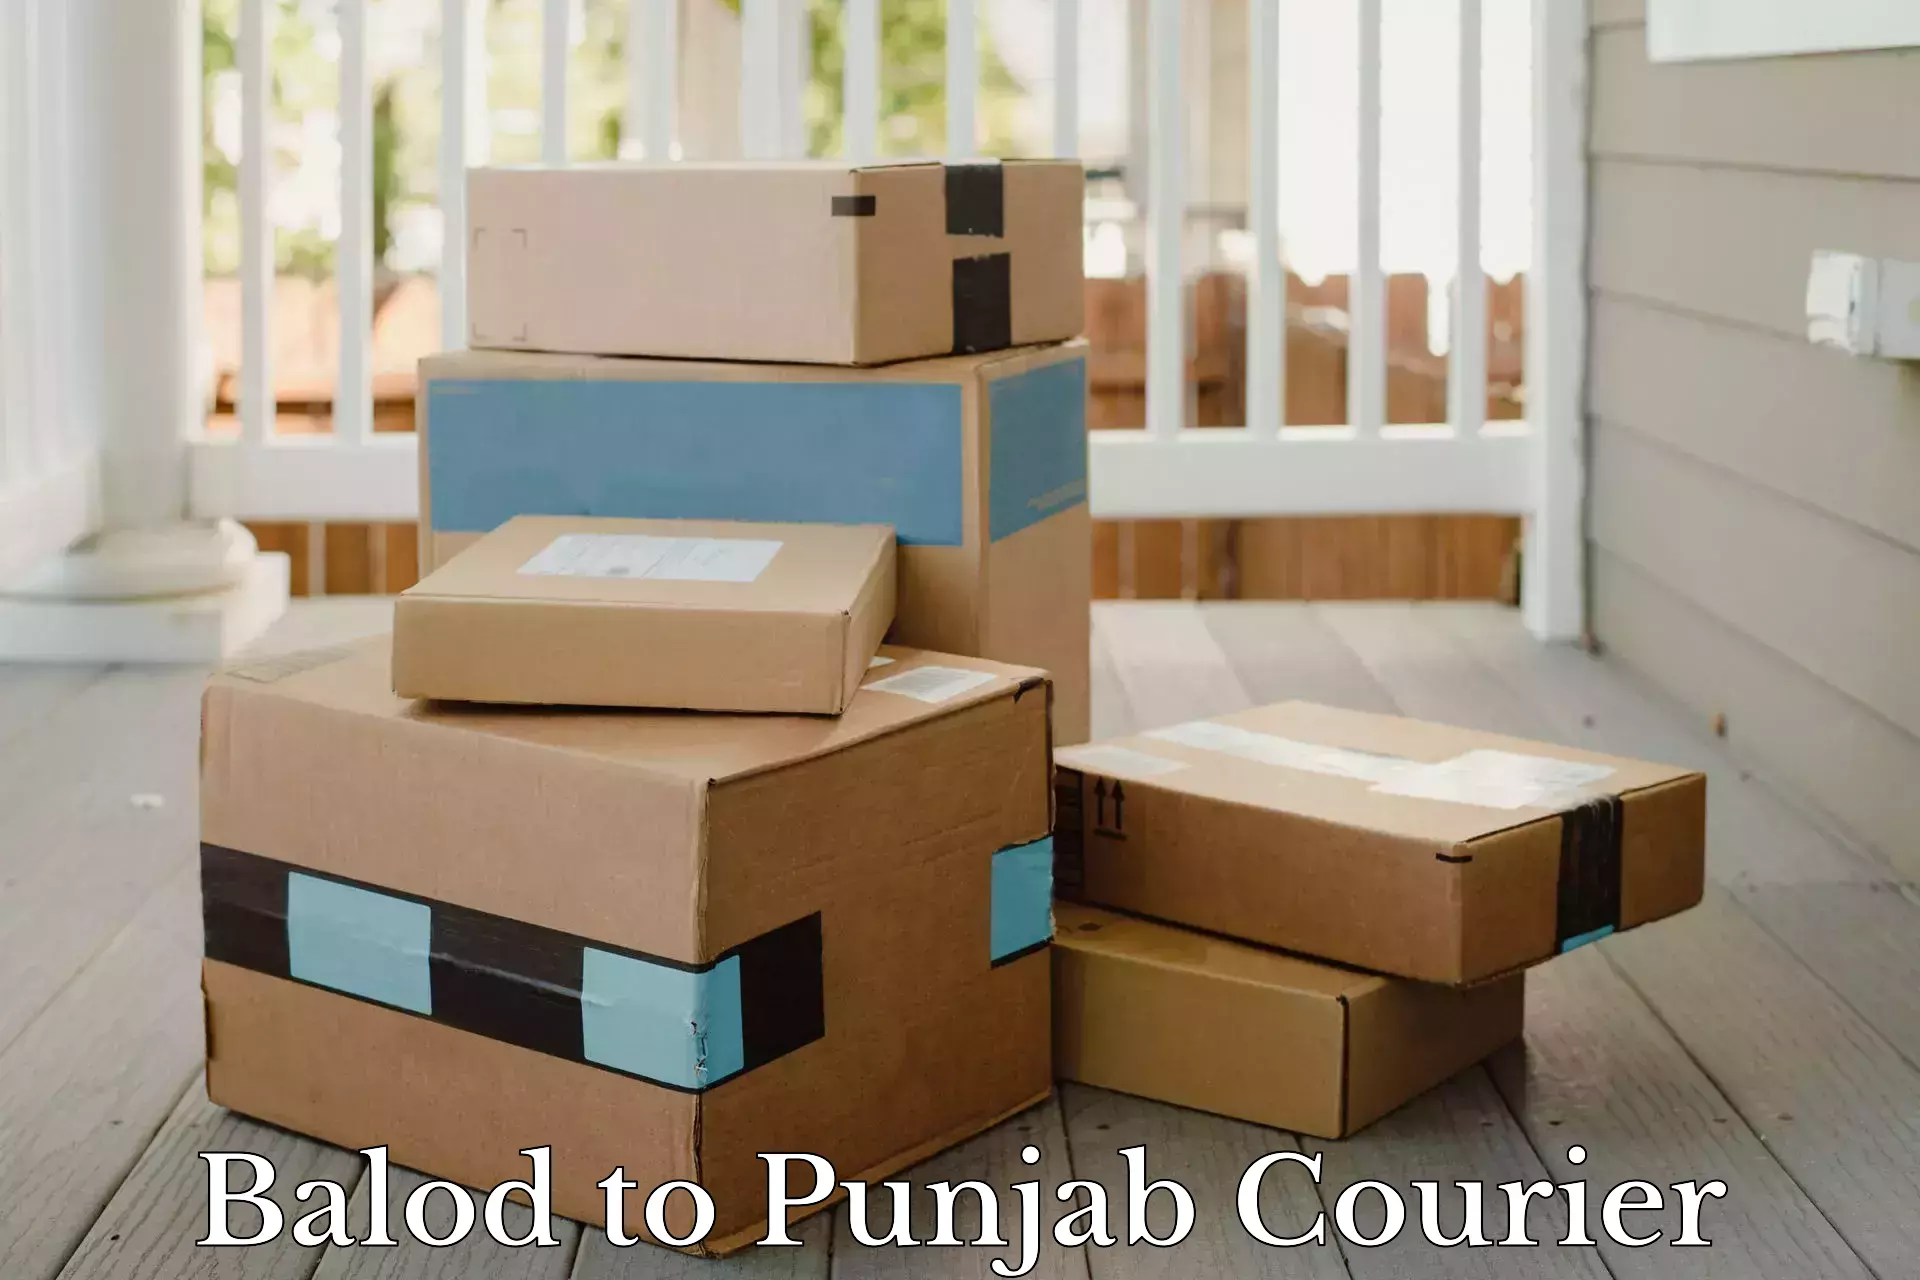 Full-service courier options Balod to Dera Bassi